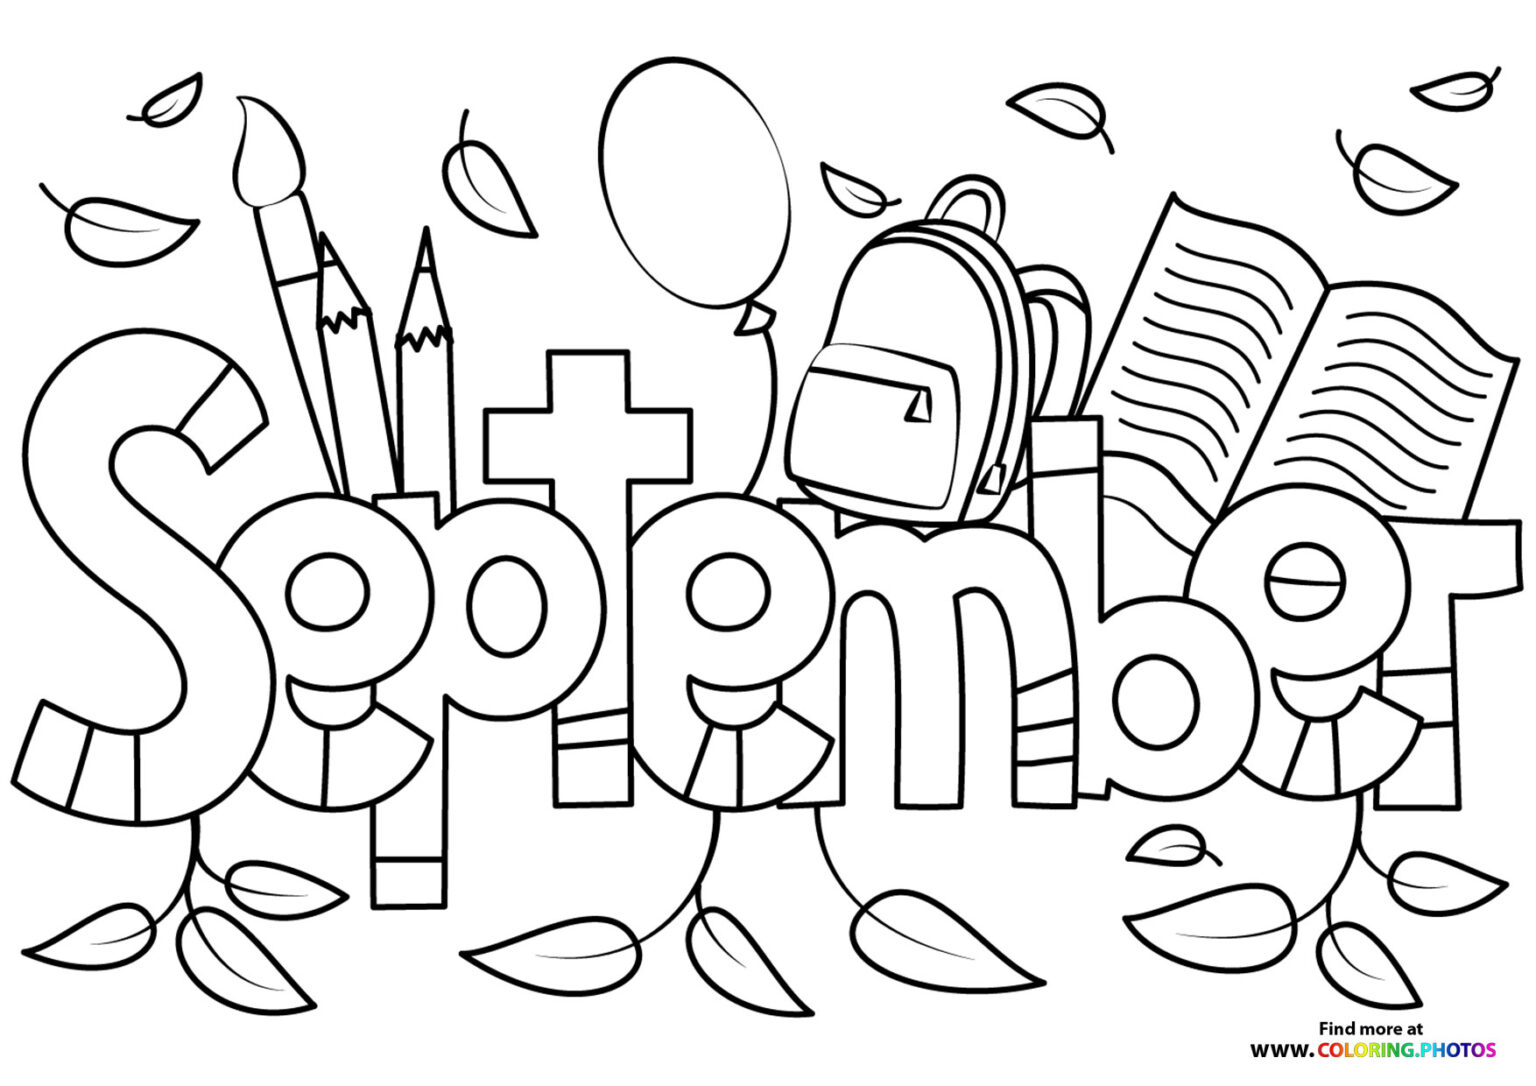 September Coloring Pages Coloring Pages